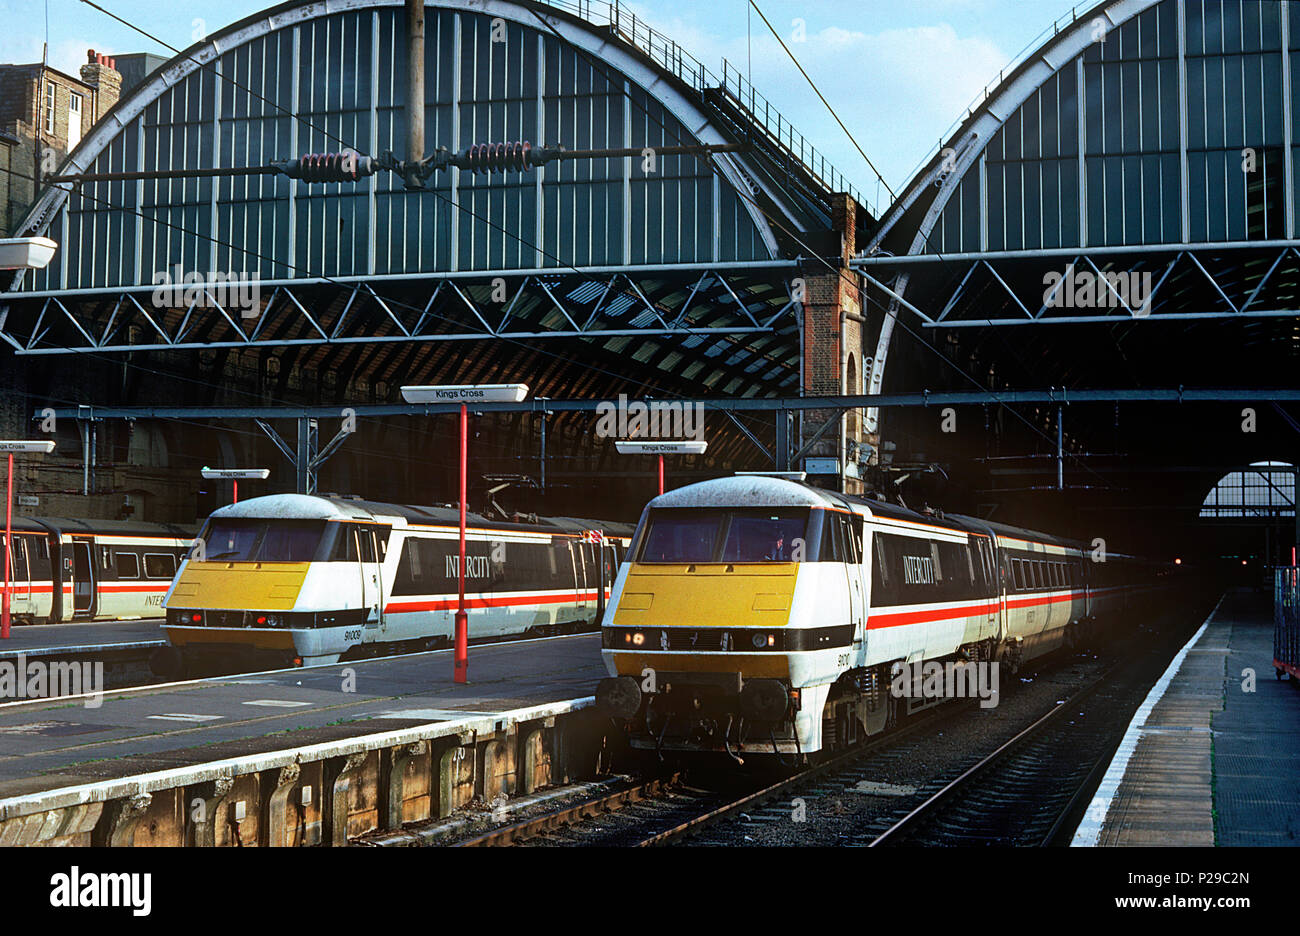 A pair of class 91 electric locomotives in the original Swallow InterCity livery numbers 91009 (left) and 91010 (right) await their next turns of duty at London Kings Cross. 14th August 1992. Stock Photo